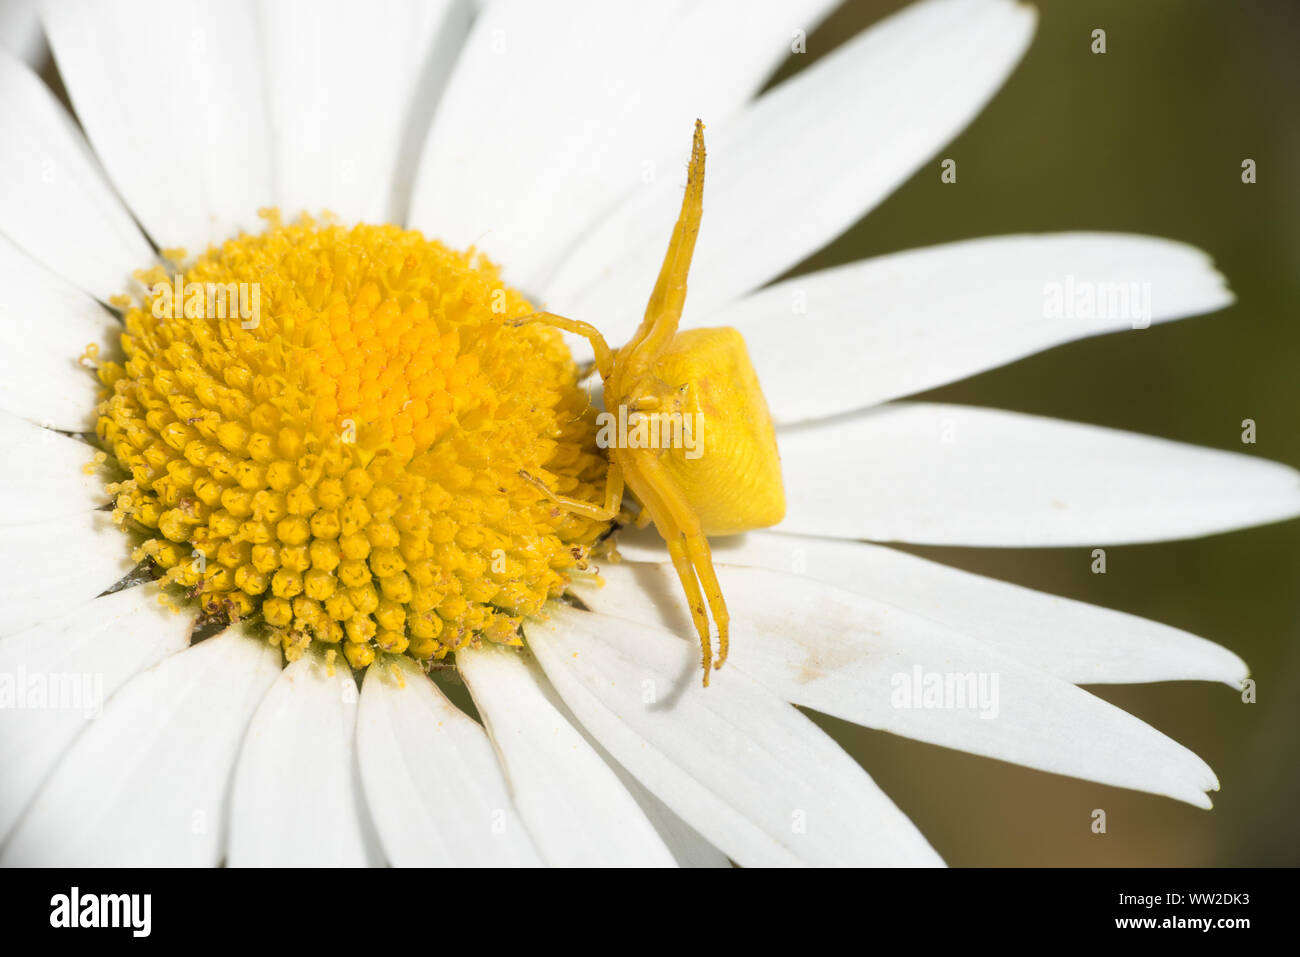 Yellow crab spider ( thomistic swollen ) on a yellow europeana Daisy flower Stock Photo